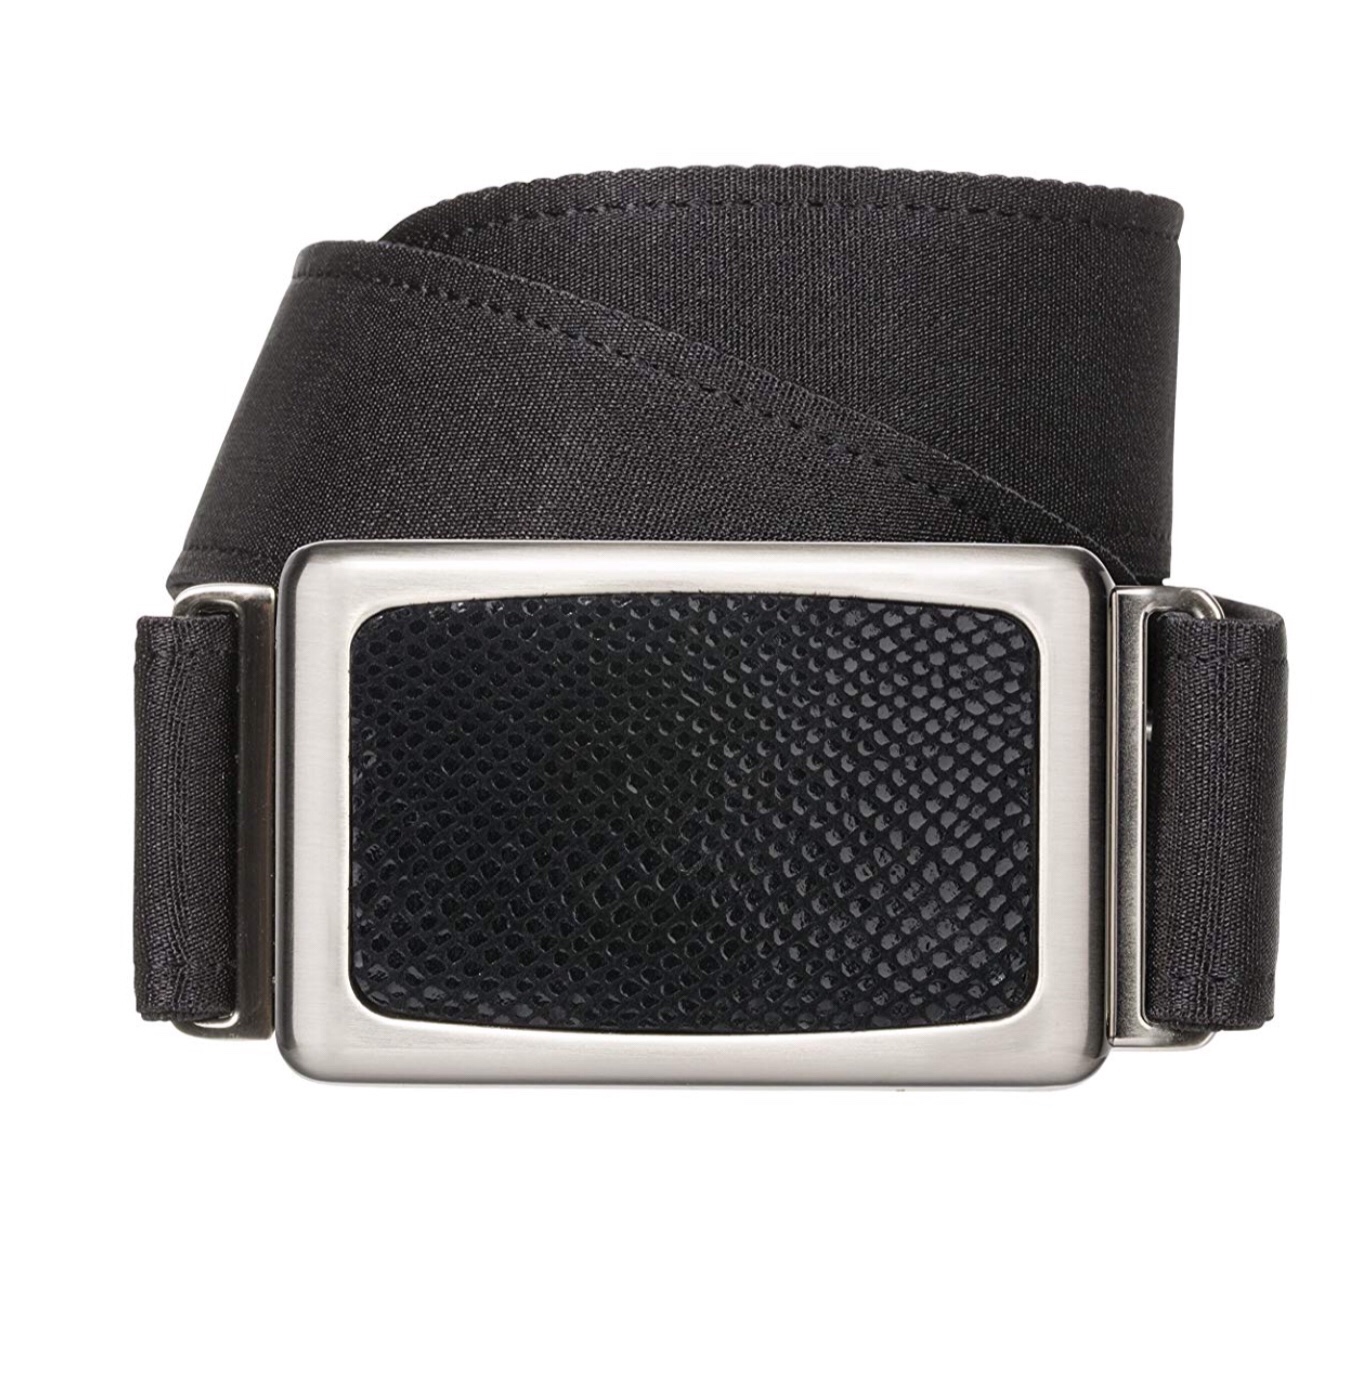 “Must Have” Accessory: The Hipsi Belt